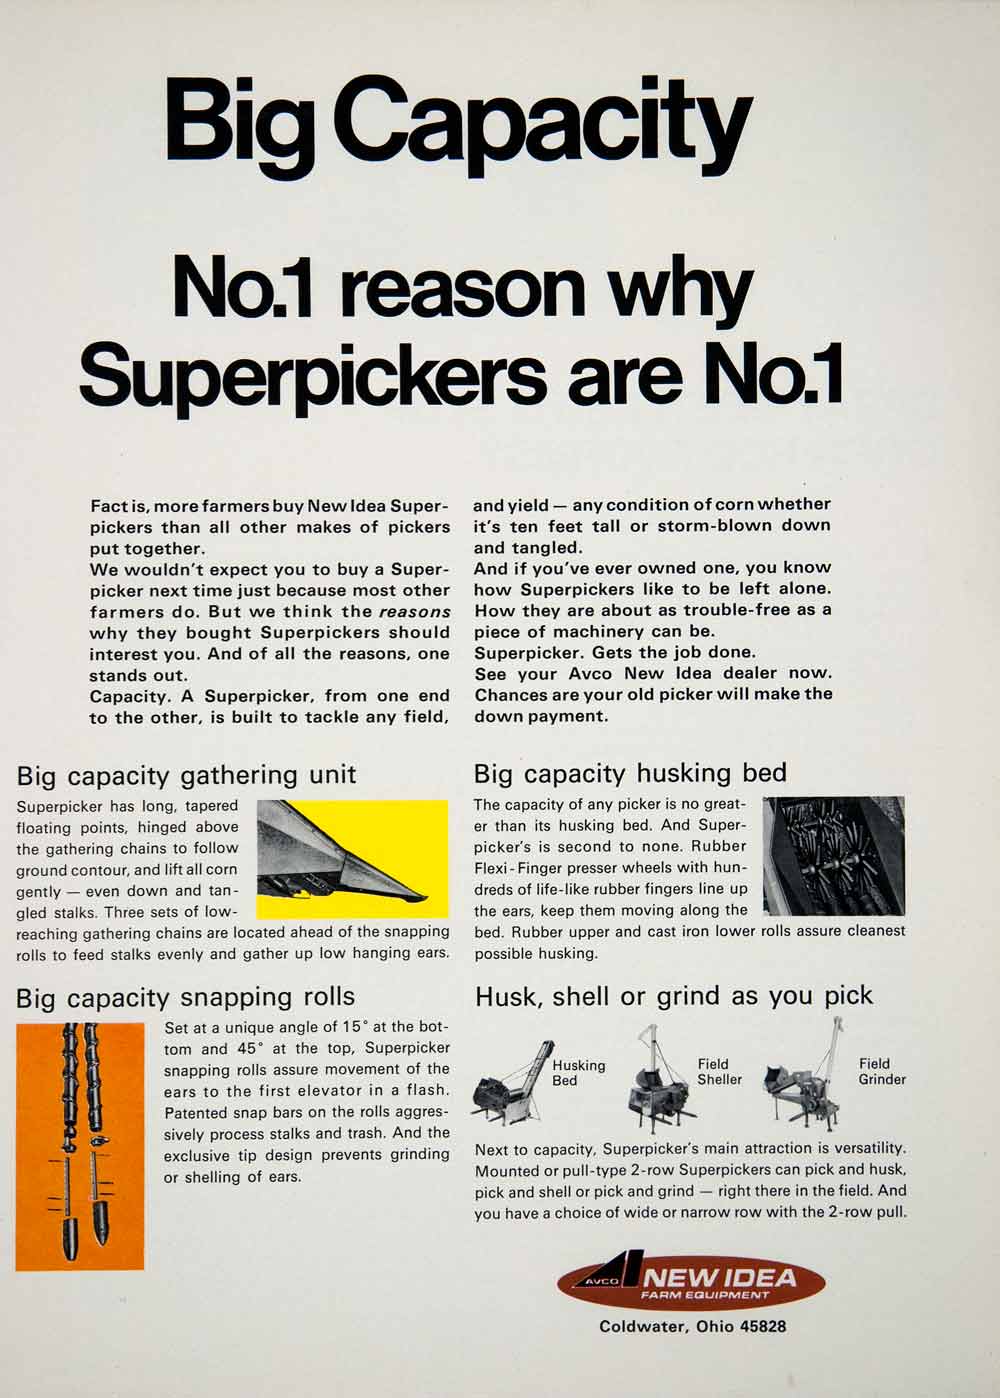 1969 Ad AVCO New Idea Superpickers Husk Shell Grind Farming Agriculture SF2